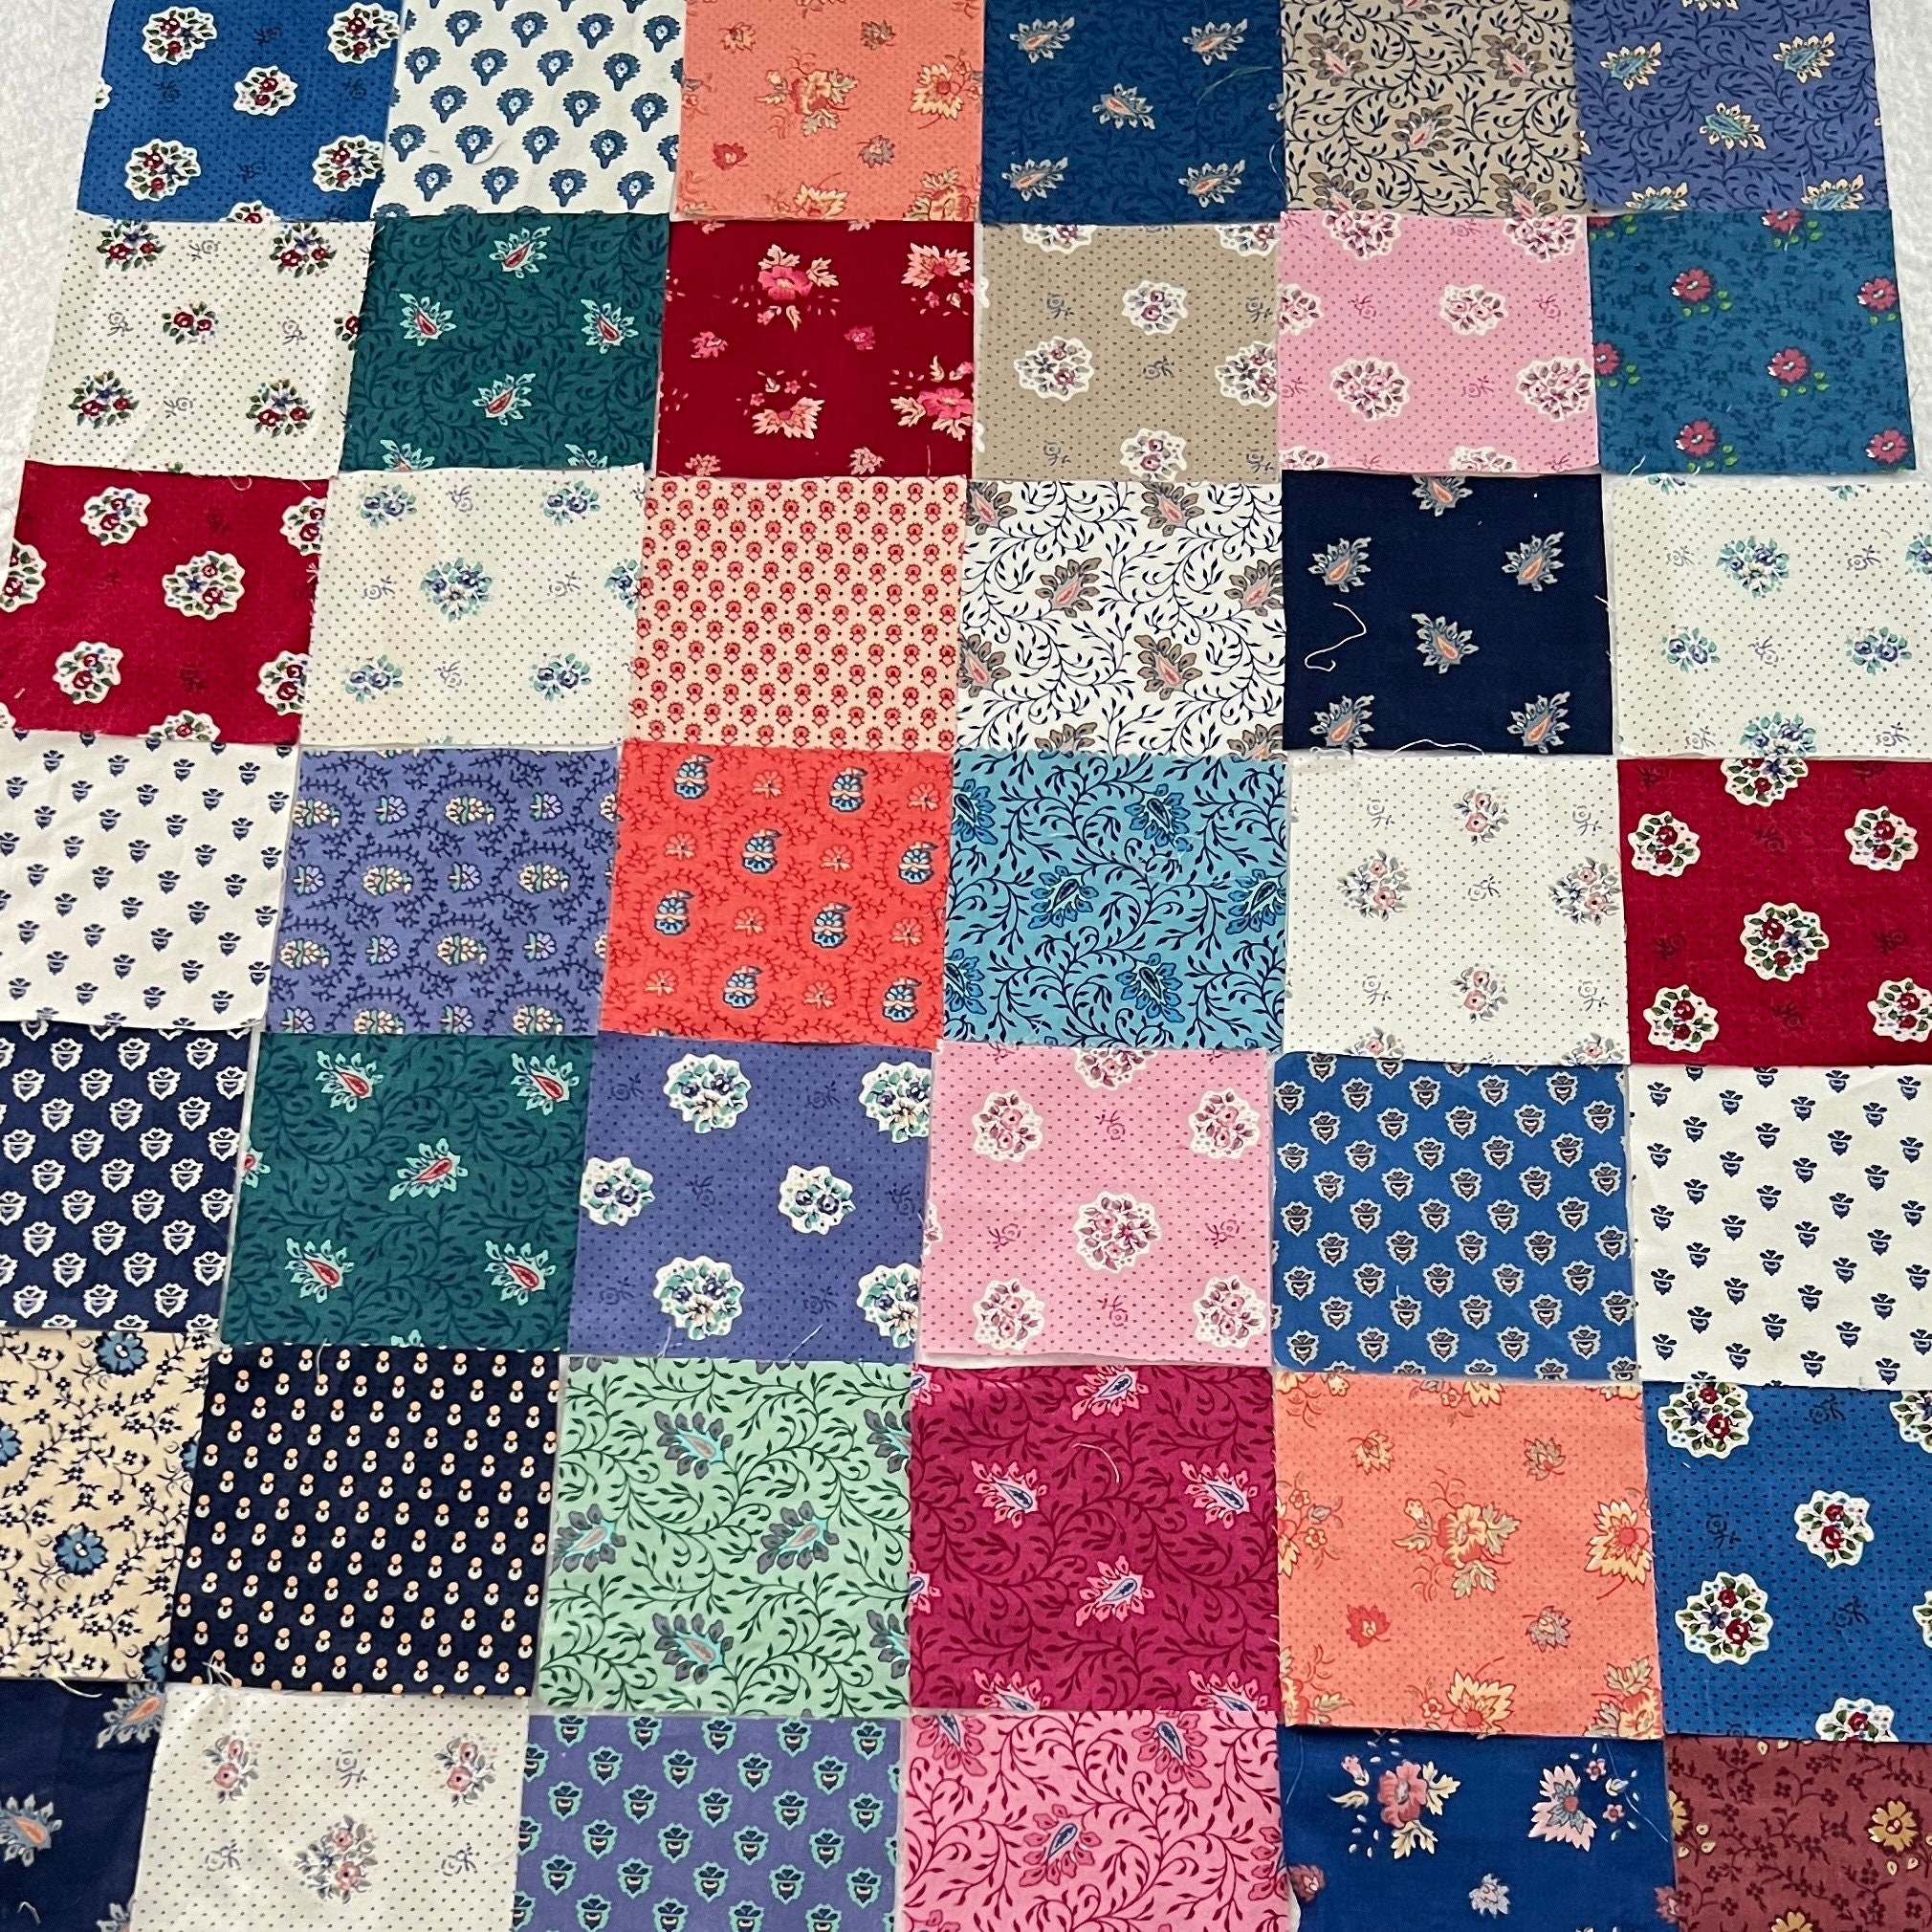 Charm Packs for Quilting 5 Inch 